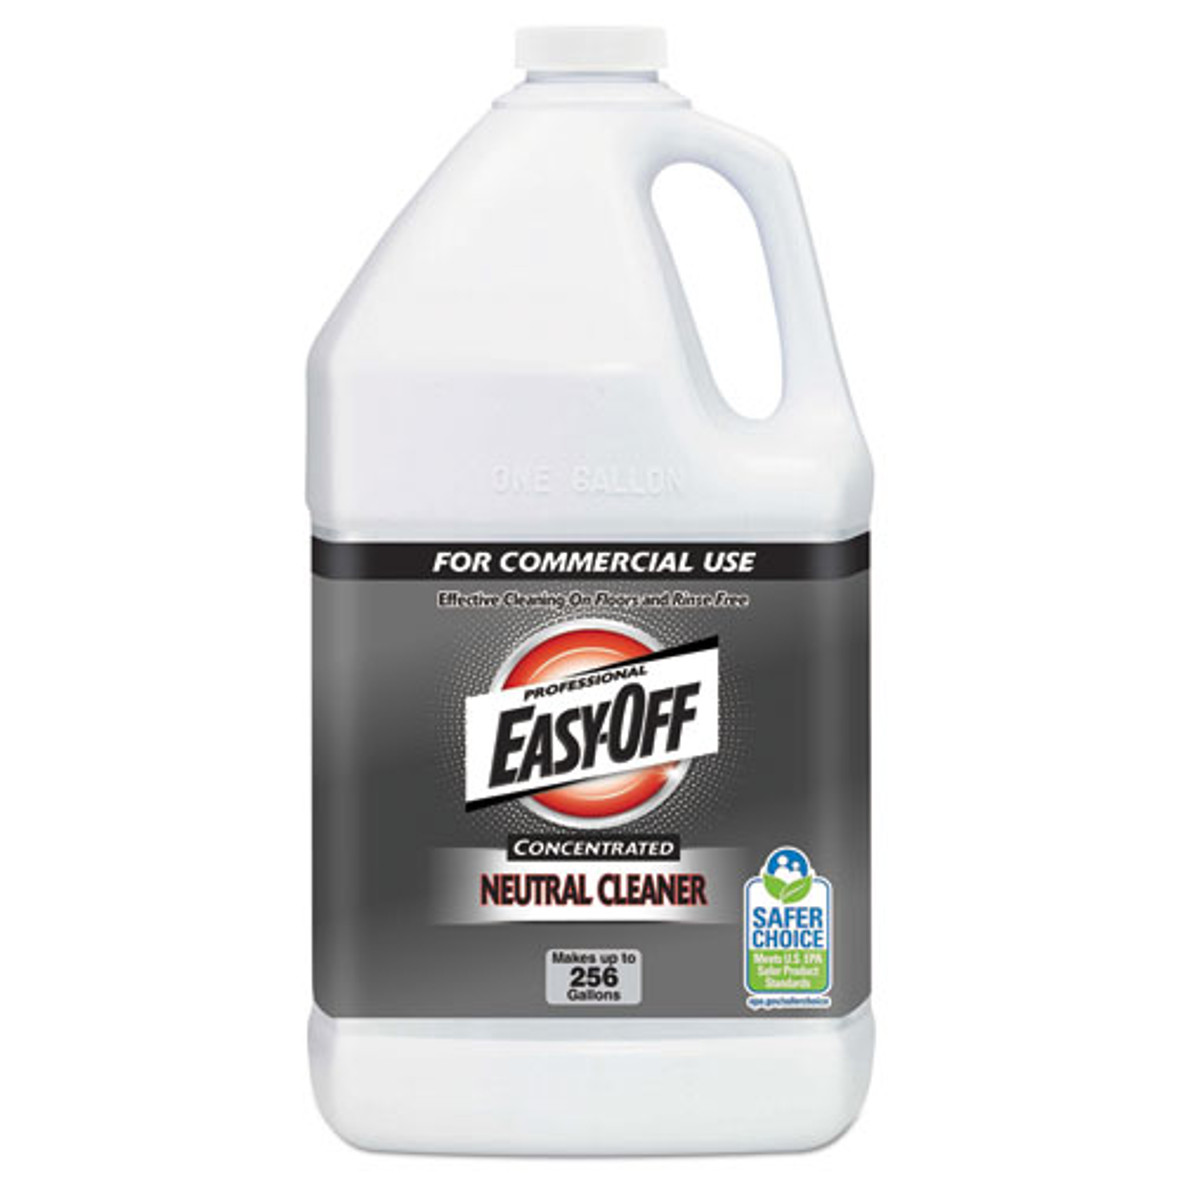 Easy-Off Concentrated Neutral Cleaner